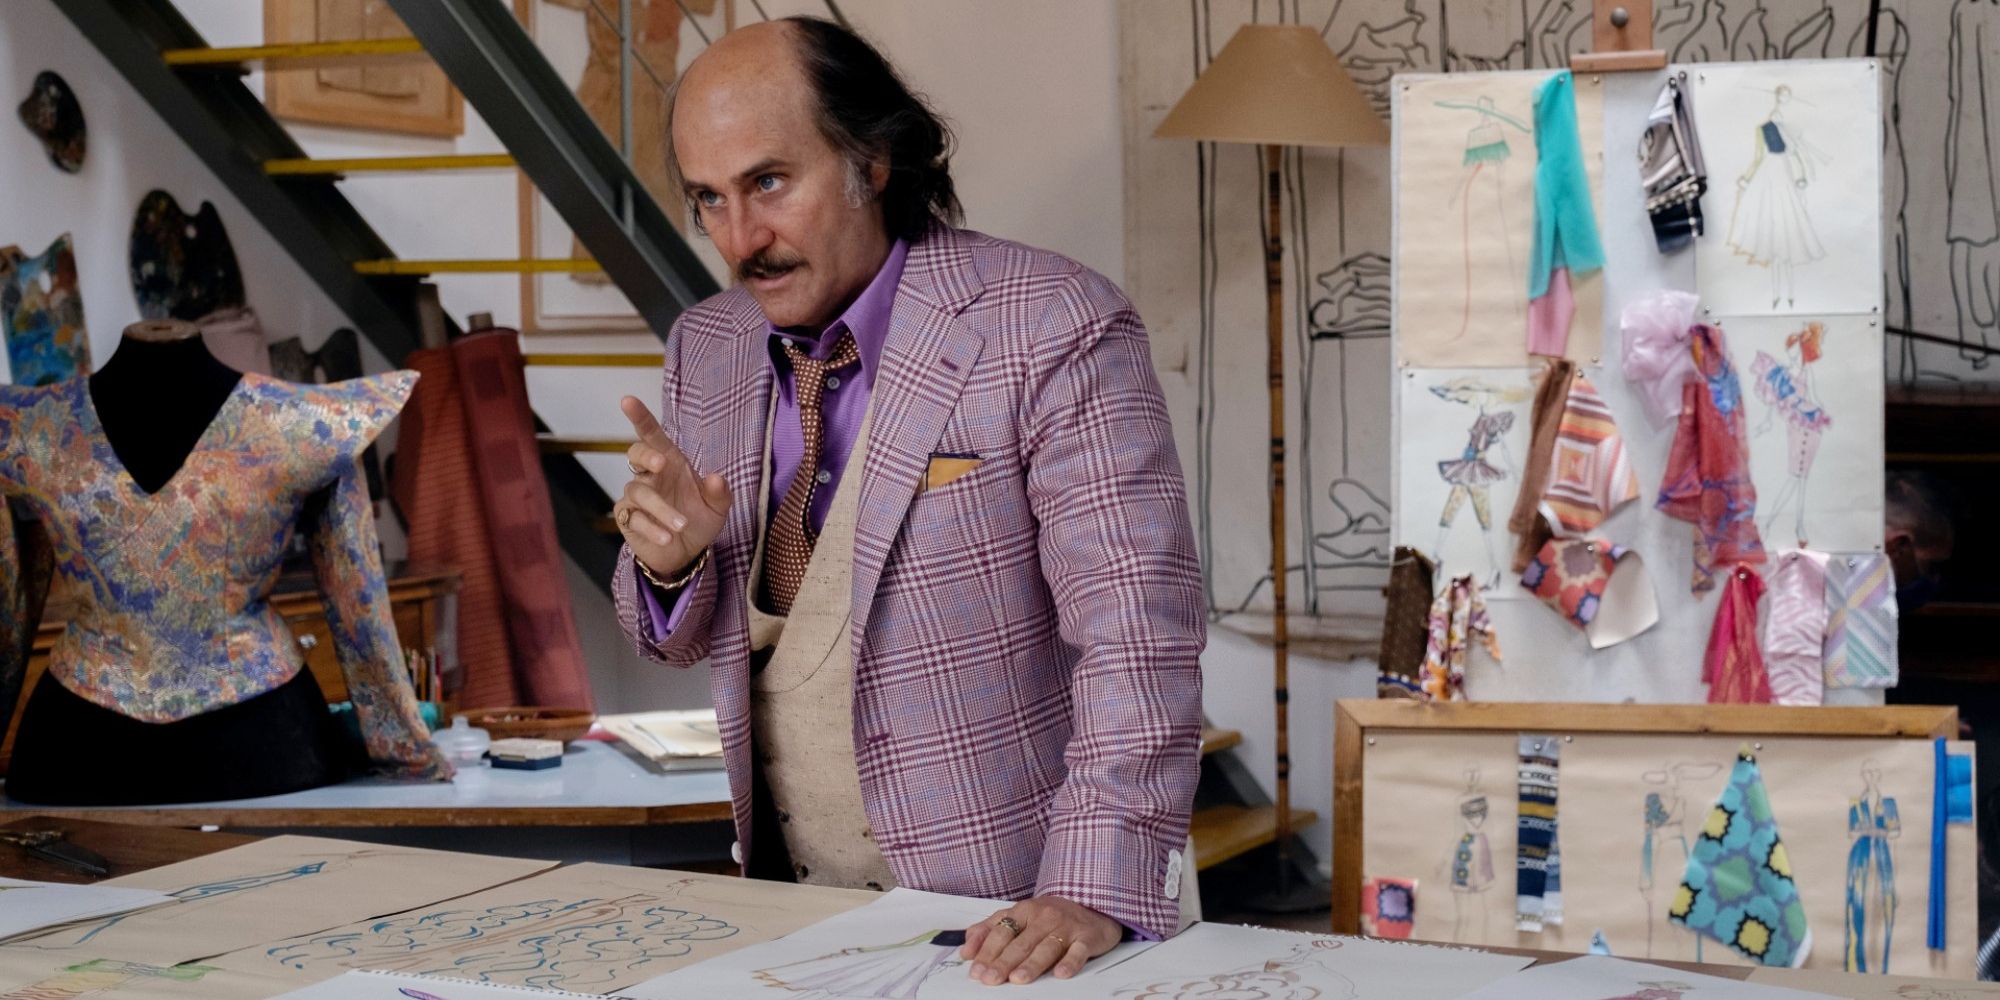 Paolo Gucci stands in front of his design table in House of Gucci.